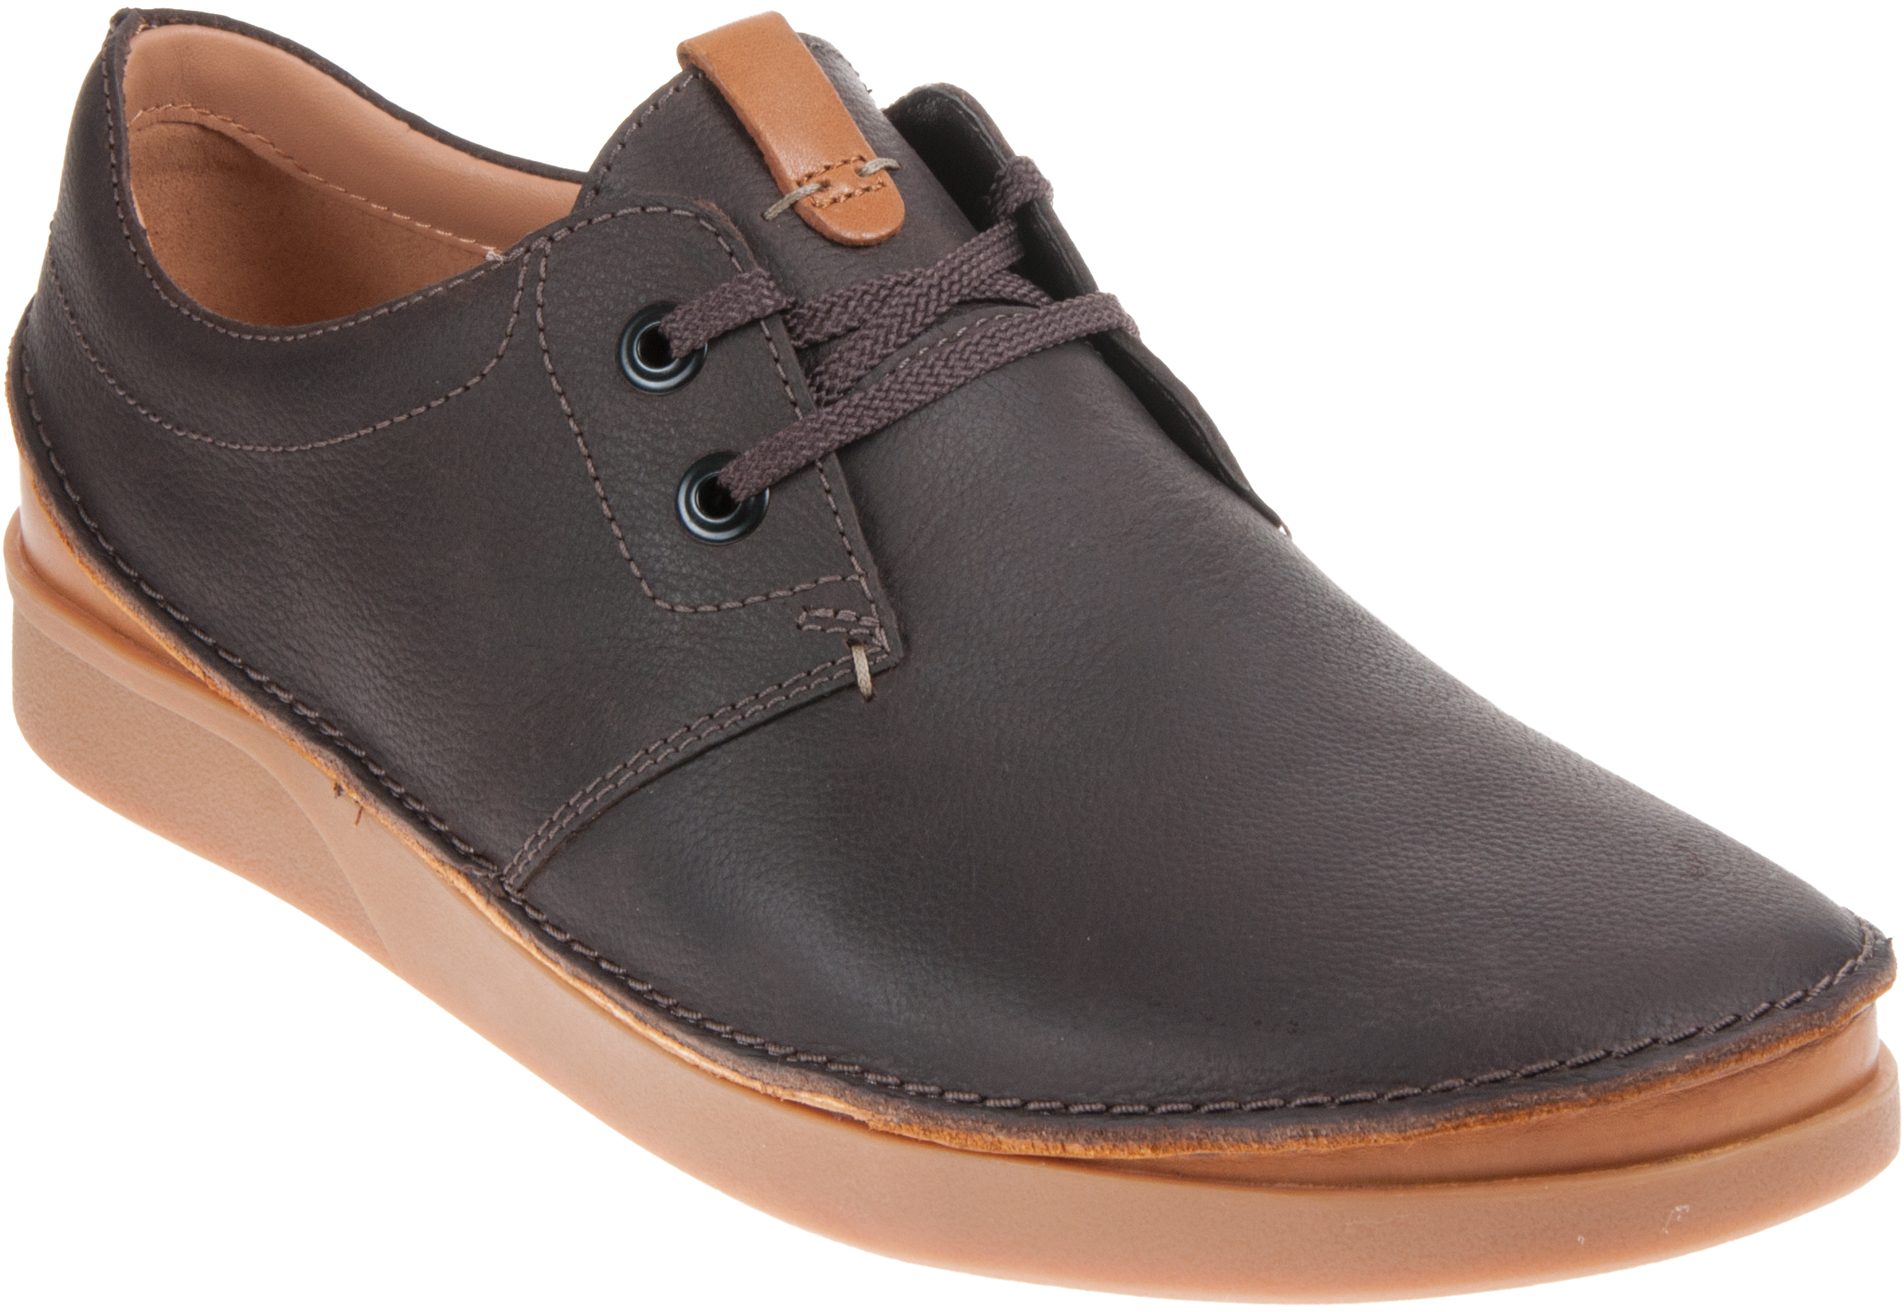 verbanning Beginner gijzelaar Clarks Oakland Lace Dark Brown Leather 26135393 - Casual Shoes - Humphries  Shoes